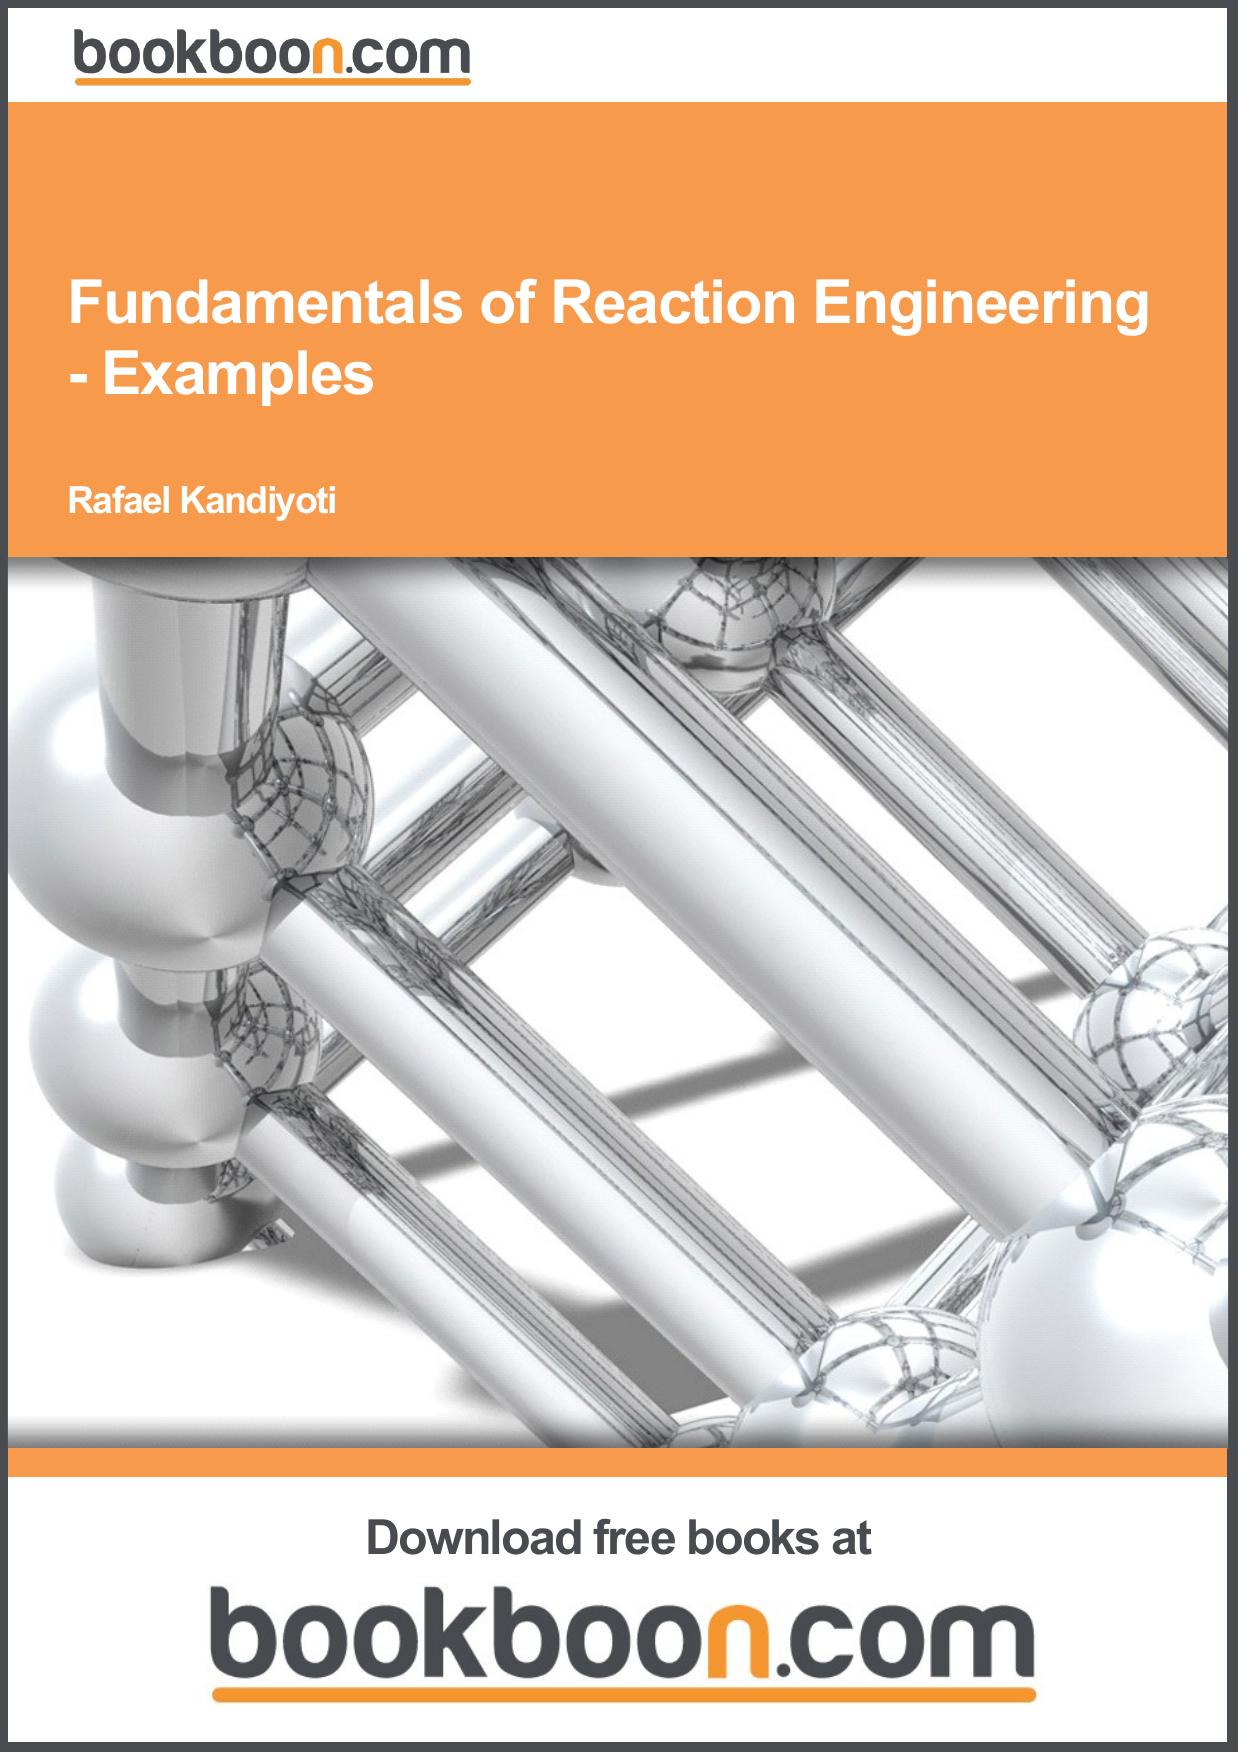 Fundamentals of Reaction Engineering - Examples